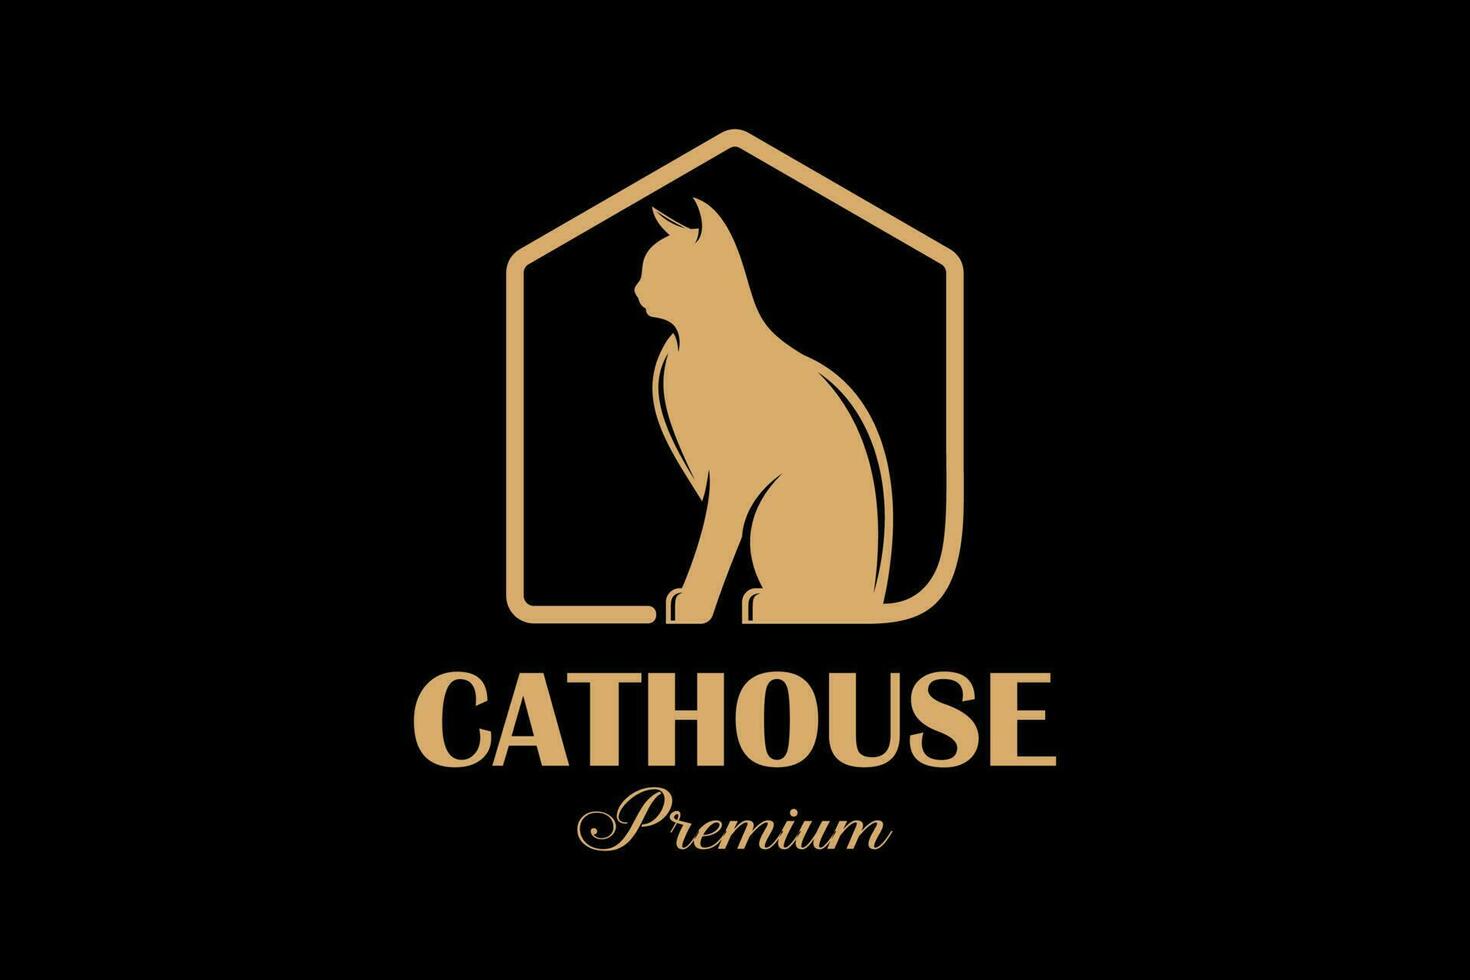 cat pet house home logo vector icon illustration